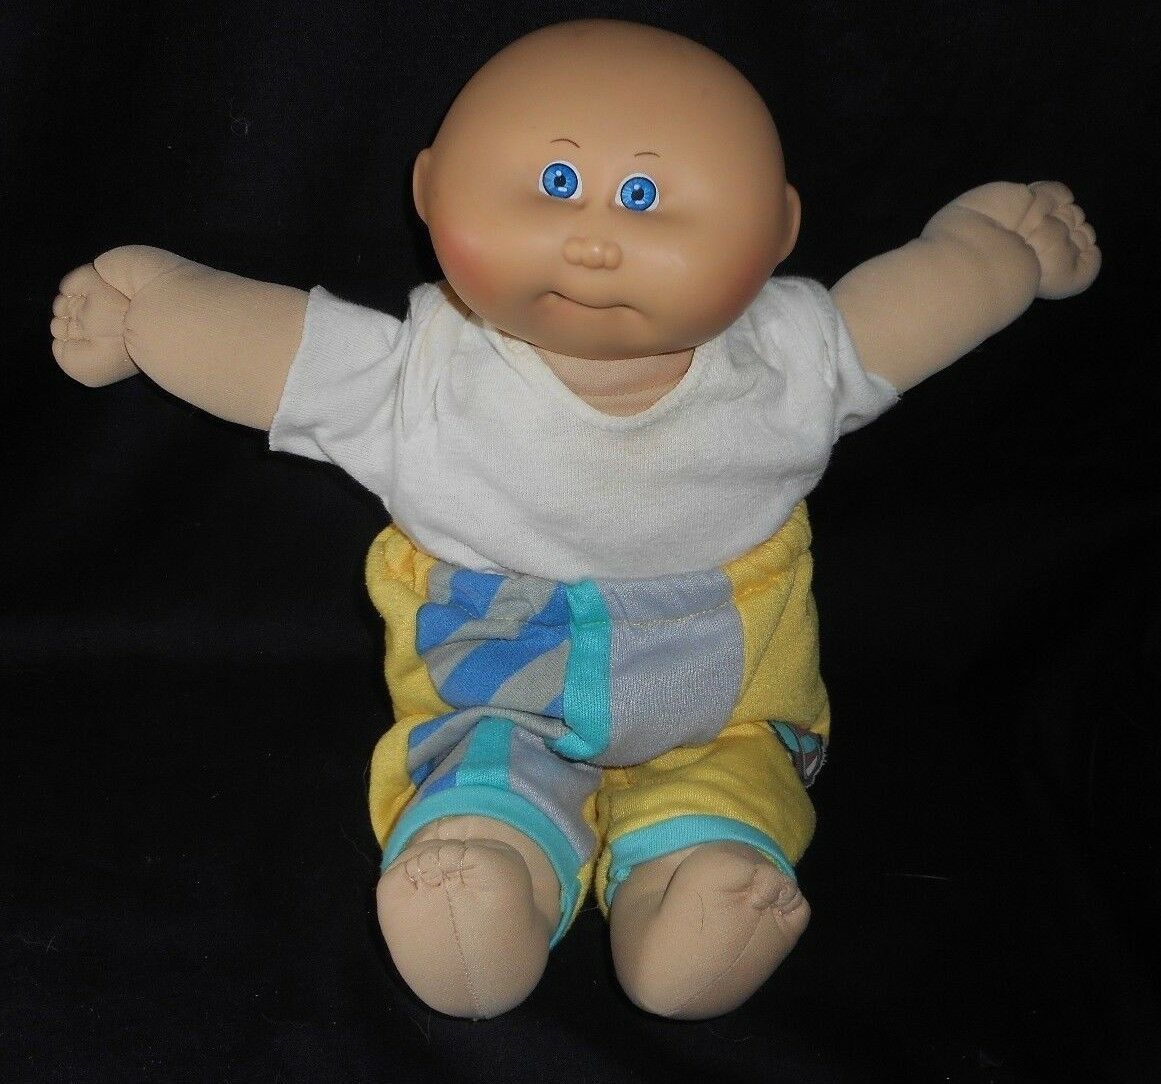 bald cabbage patch